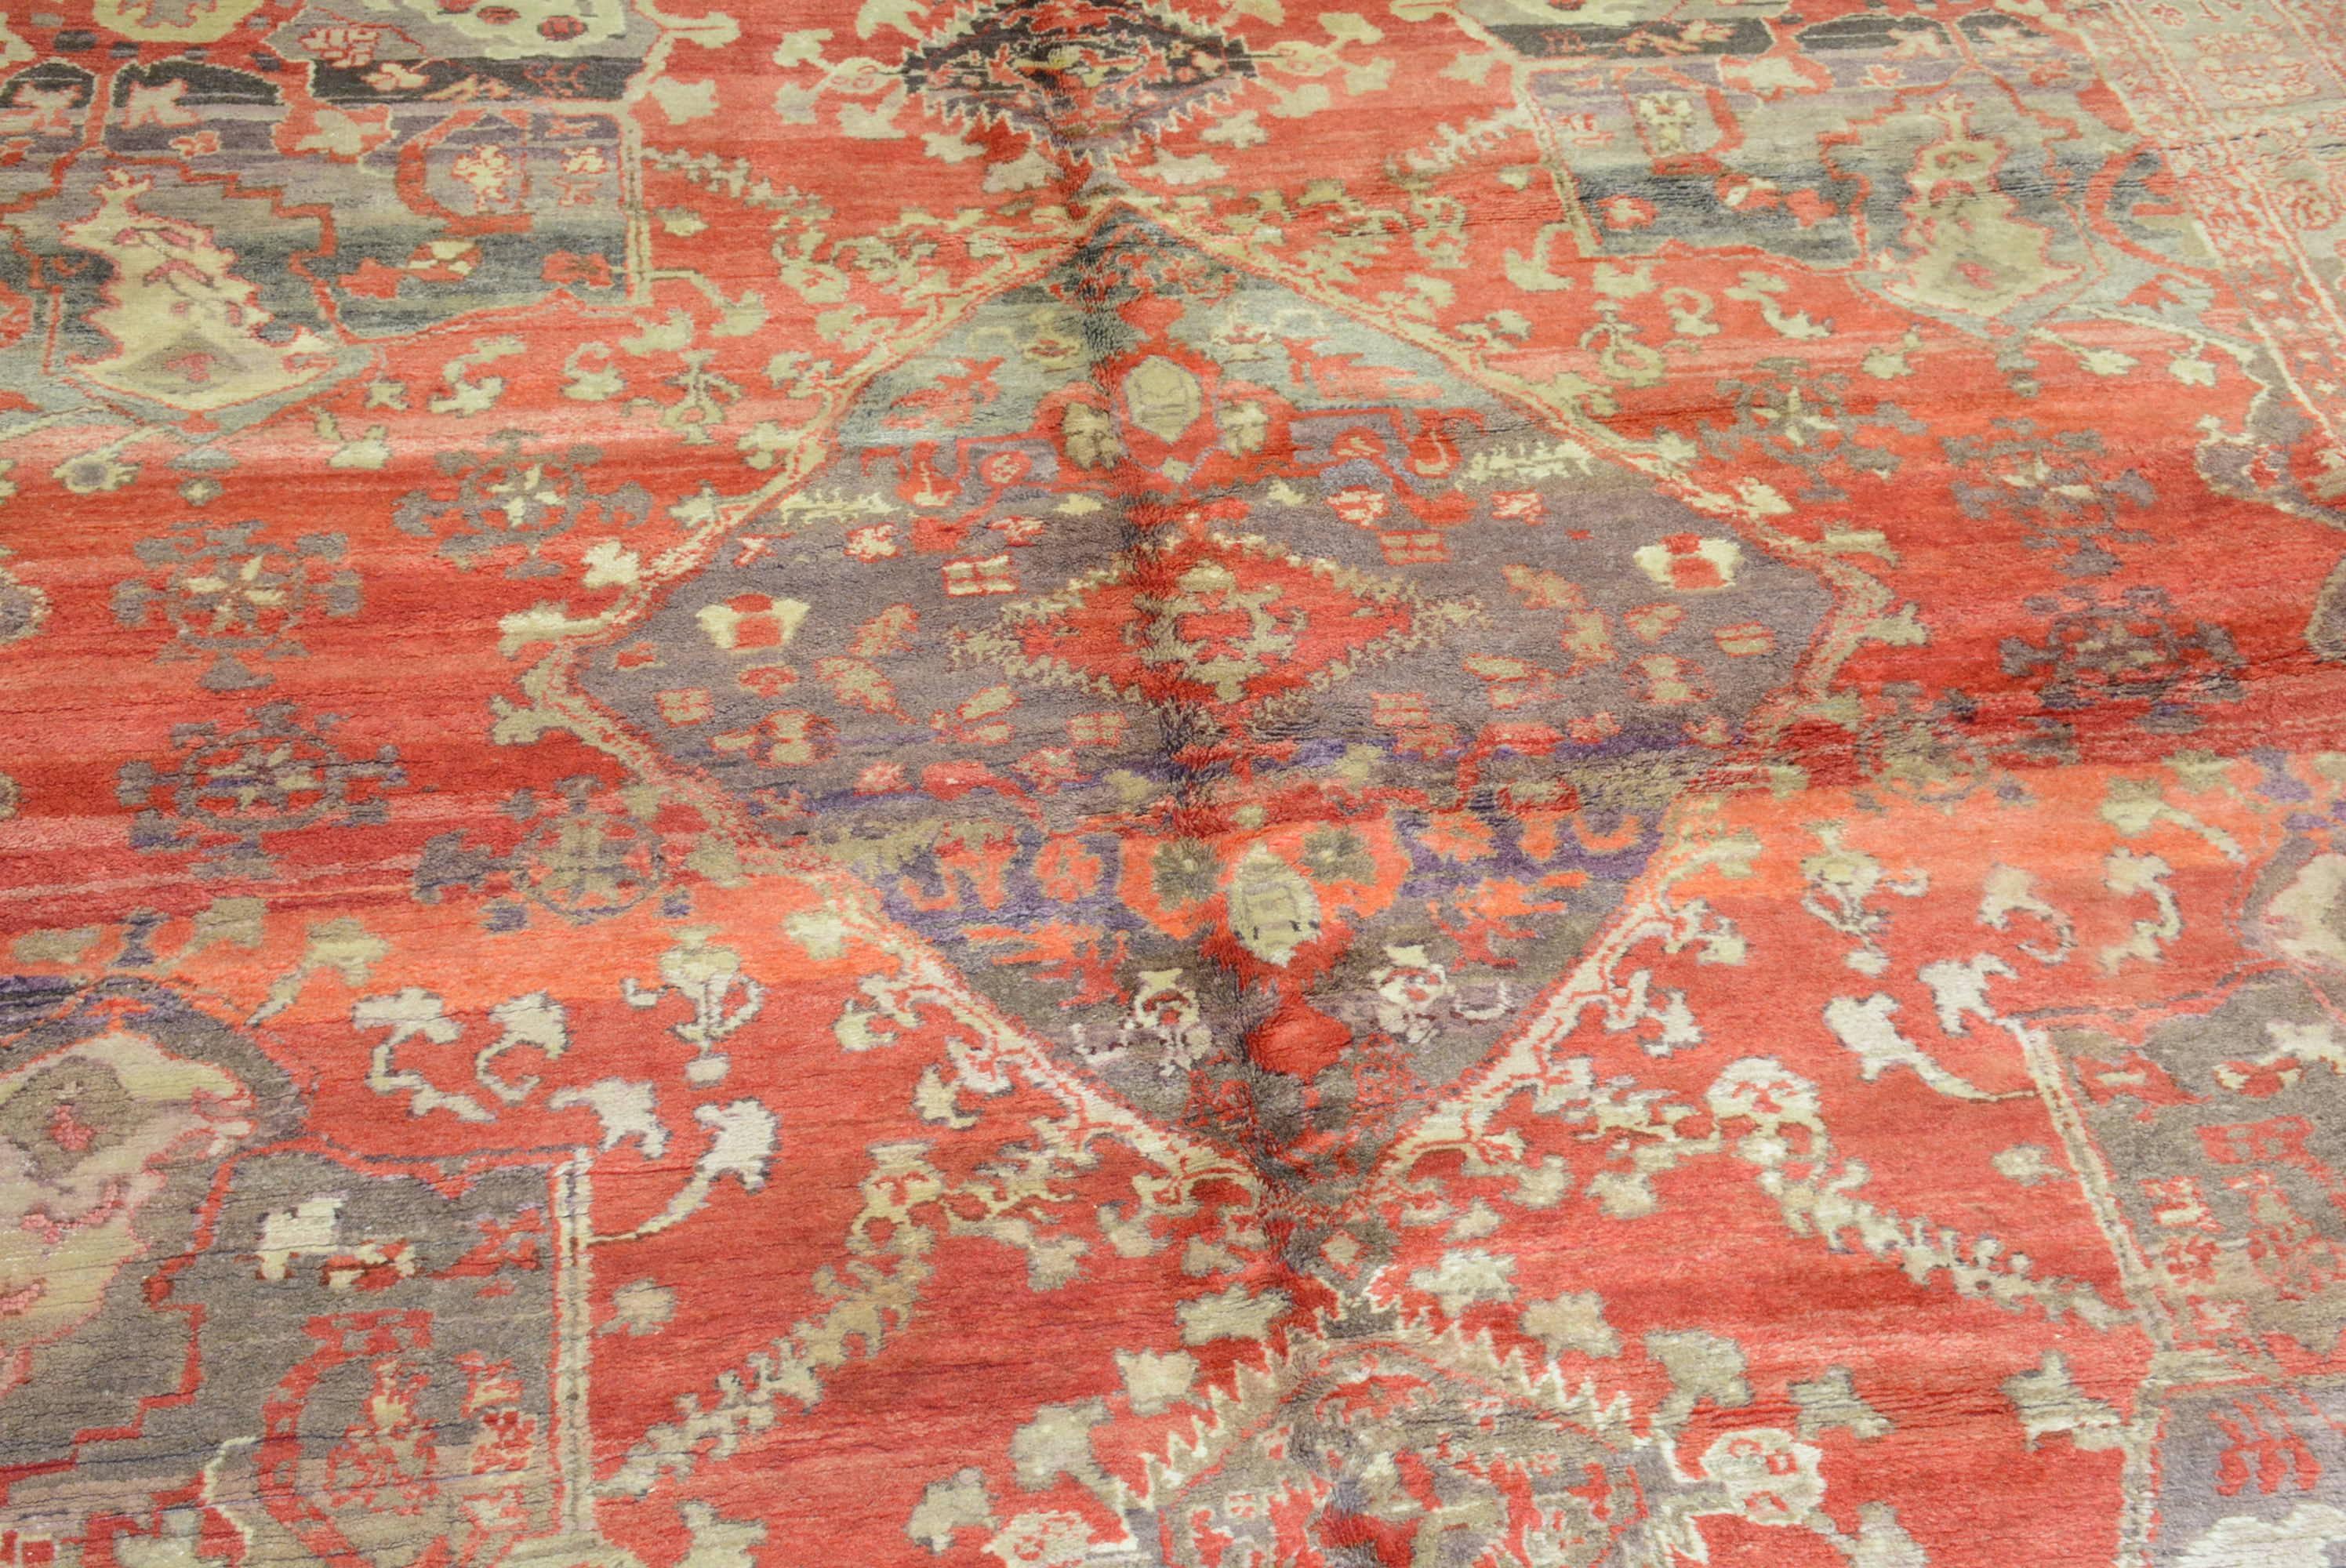 Khotan rugs are woven in Sinkiang province in western China, also known as East Turkestan.  They are often called Samarkand rugs after the central Asian city where they were traded.  Most of the rugs from this weaving area come in long and narrow